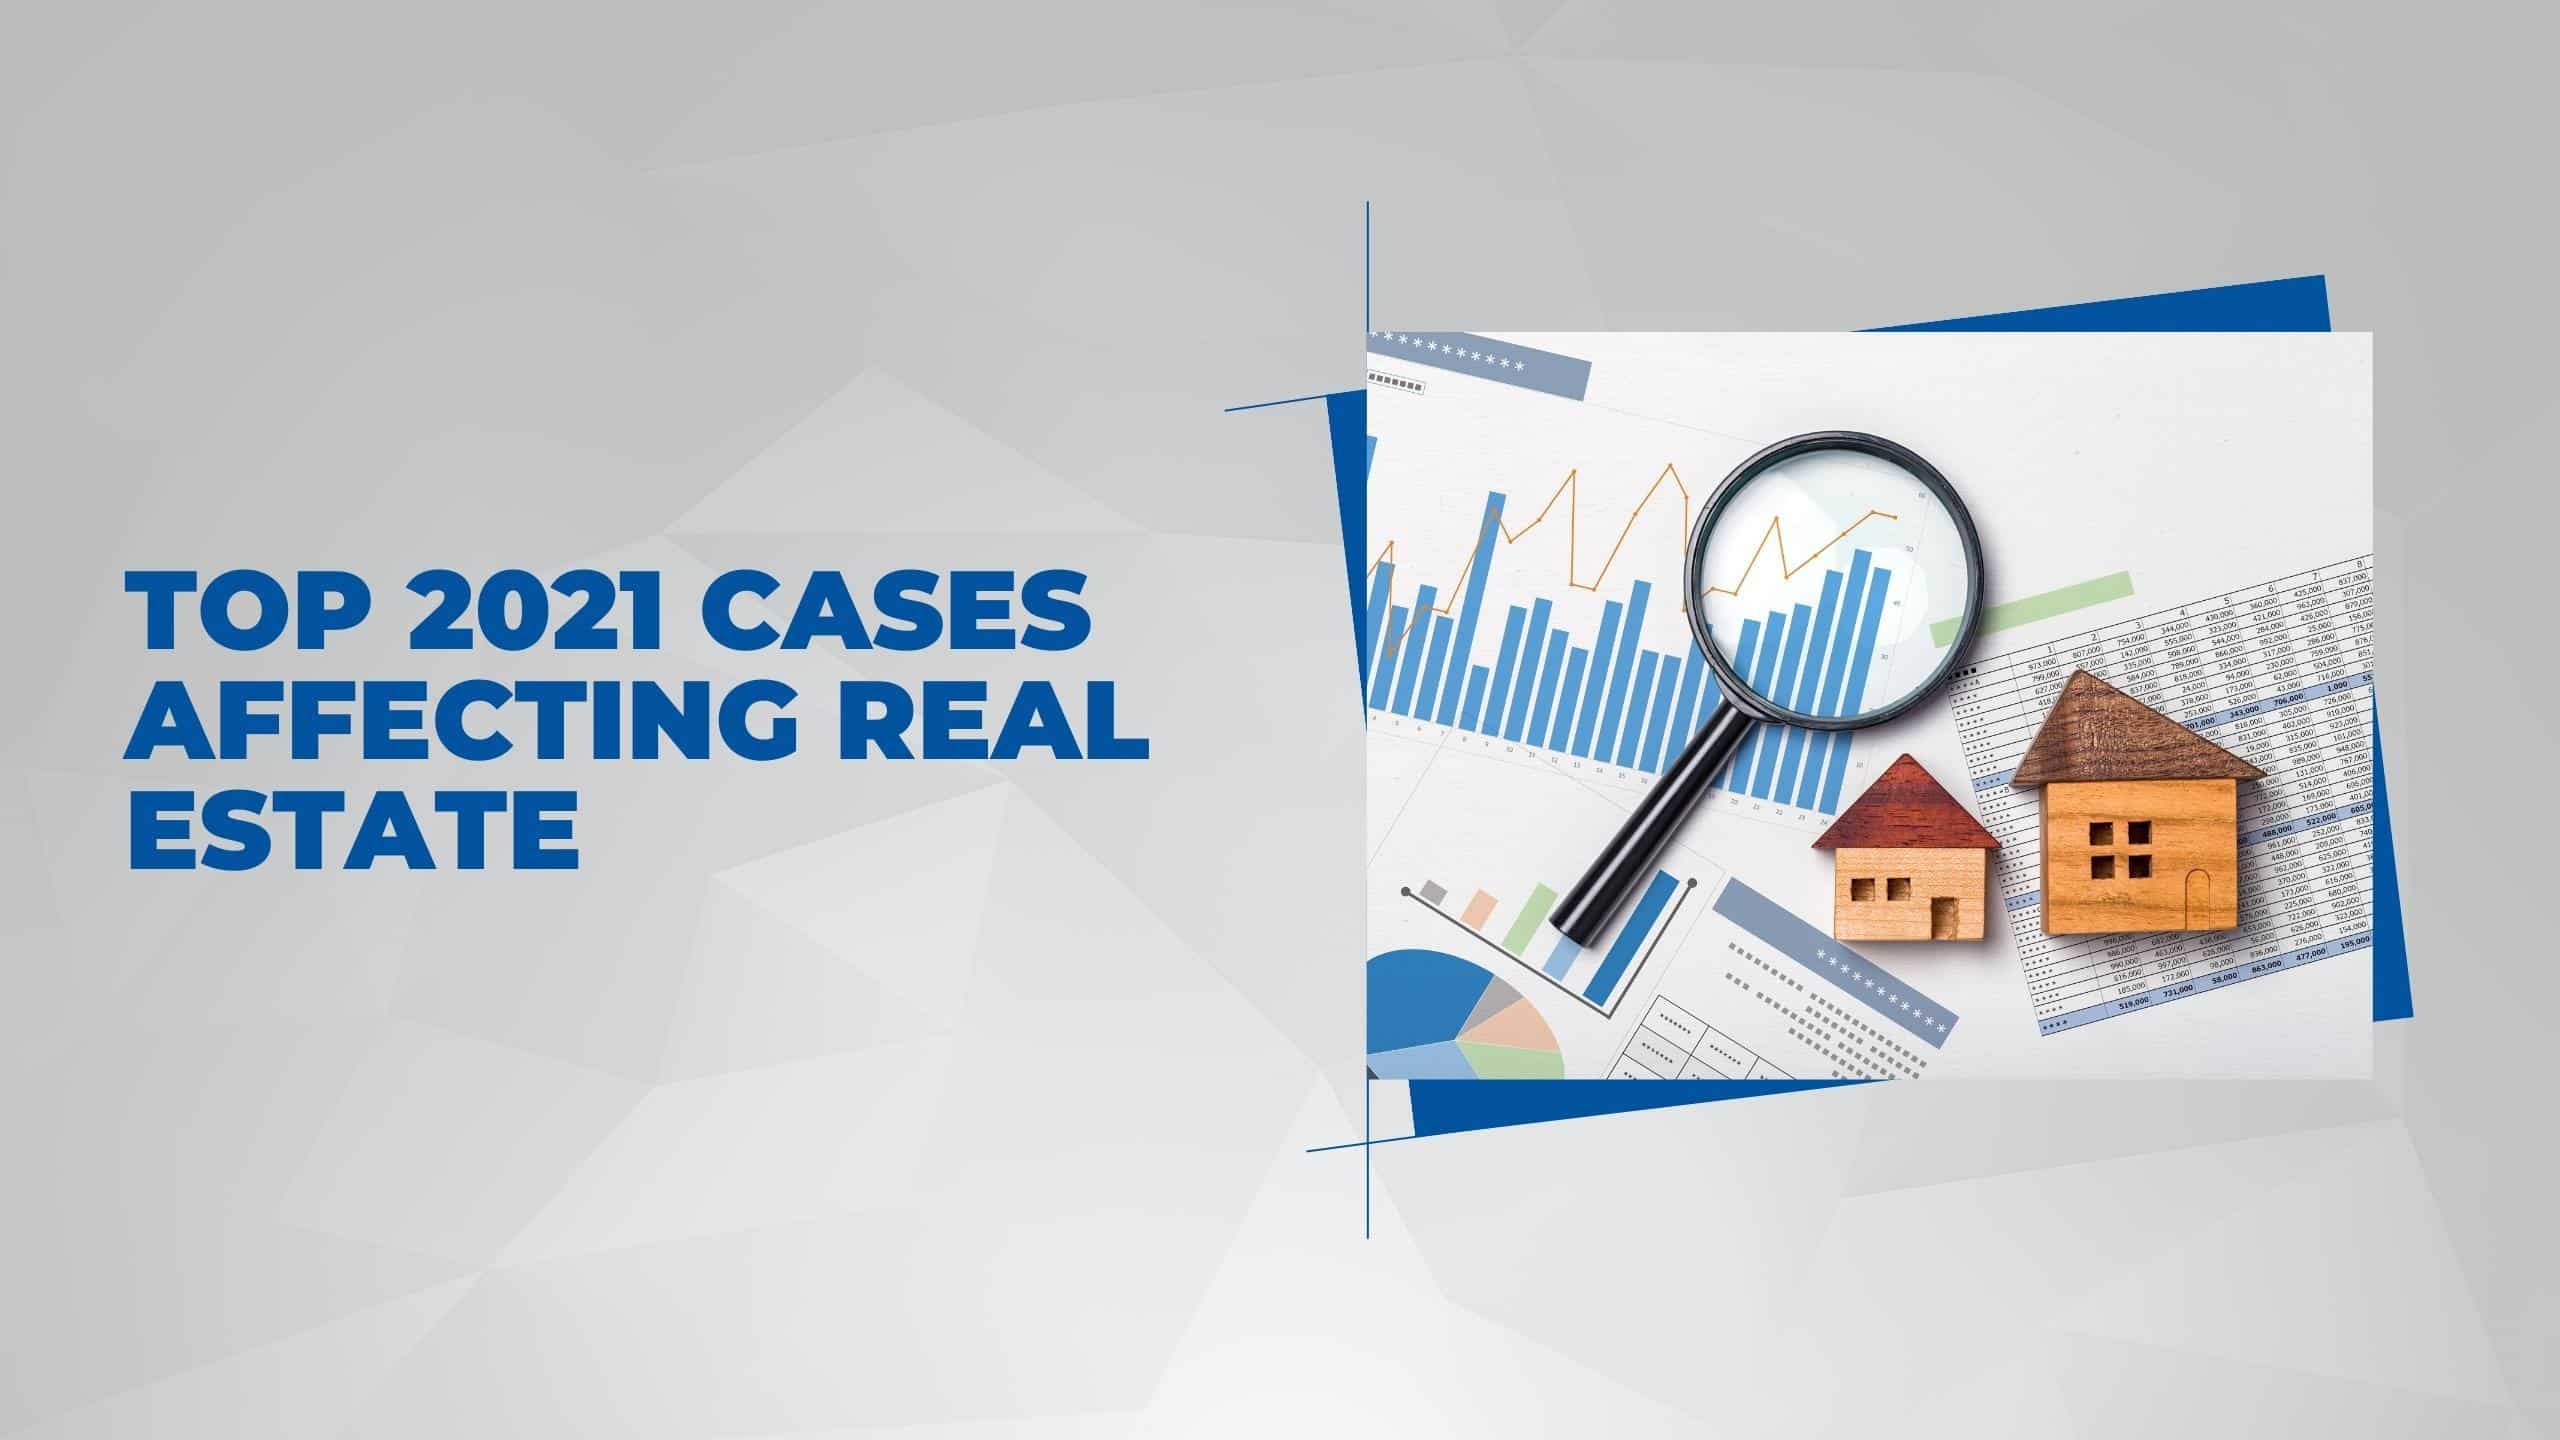 Top 2021 Cases Affecting Real Estate